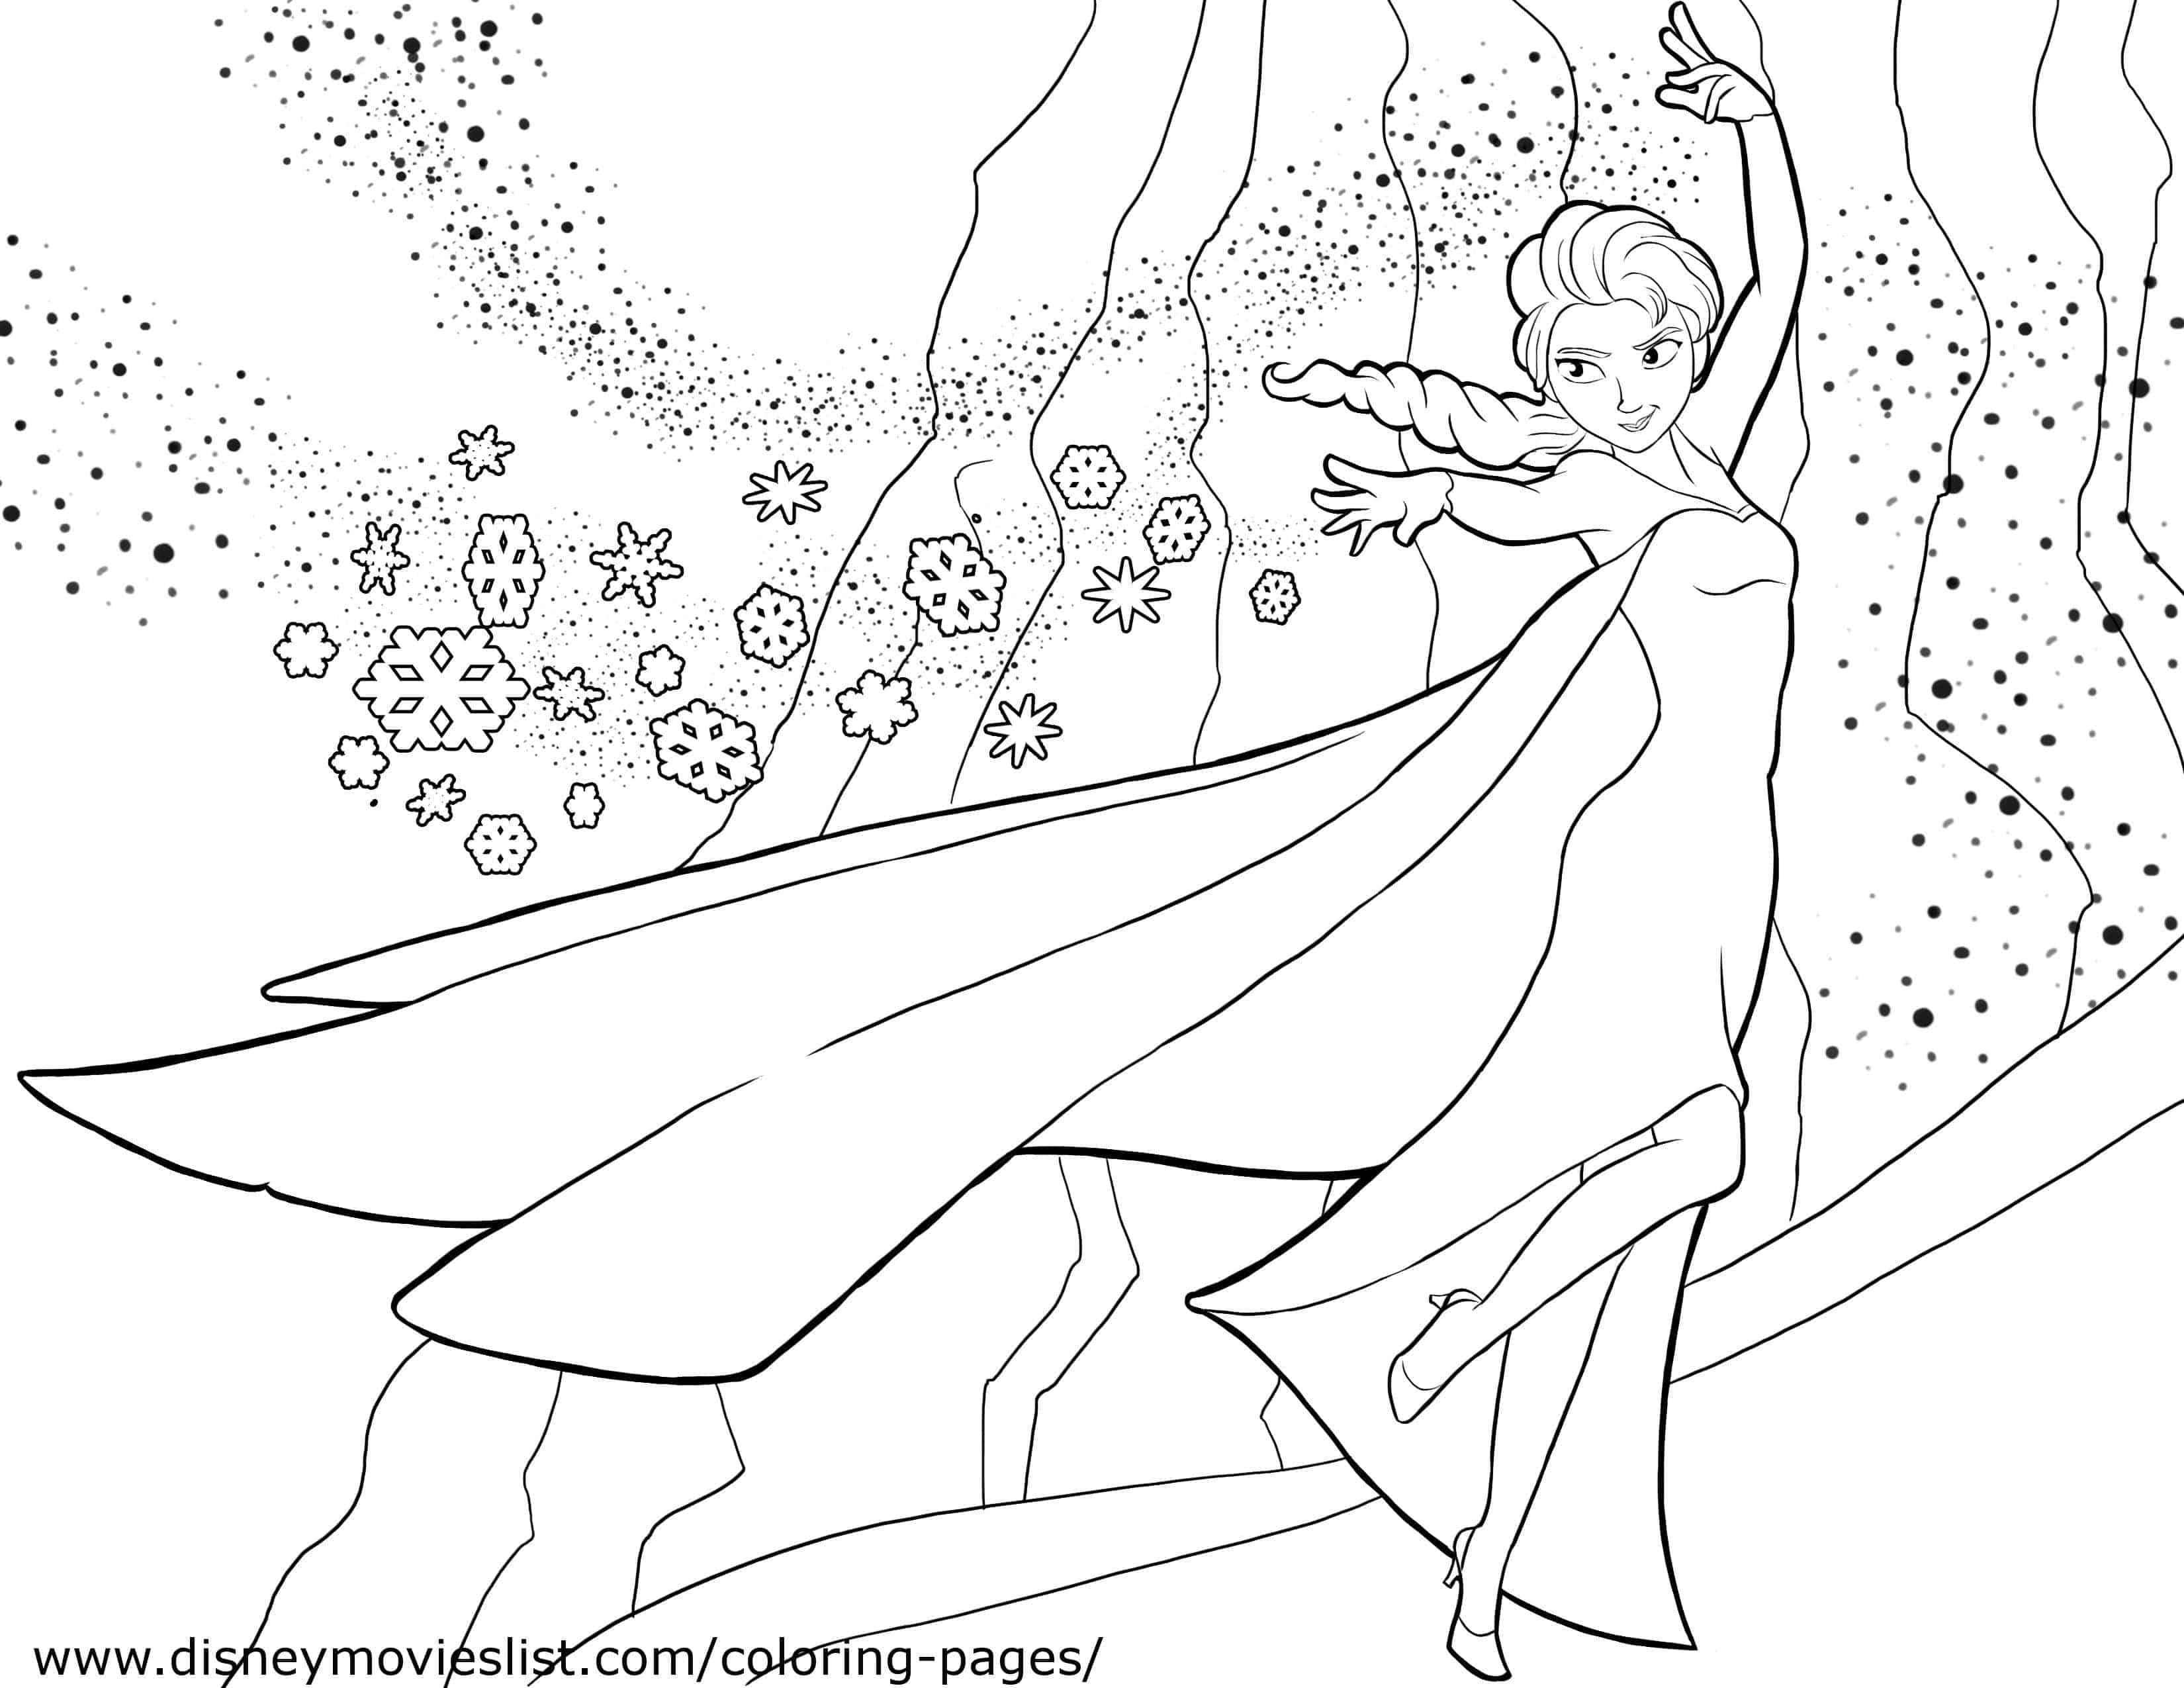 elsa-coloring-pages-free-and-printable-featured-animation